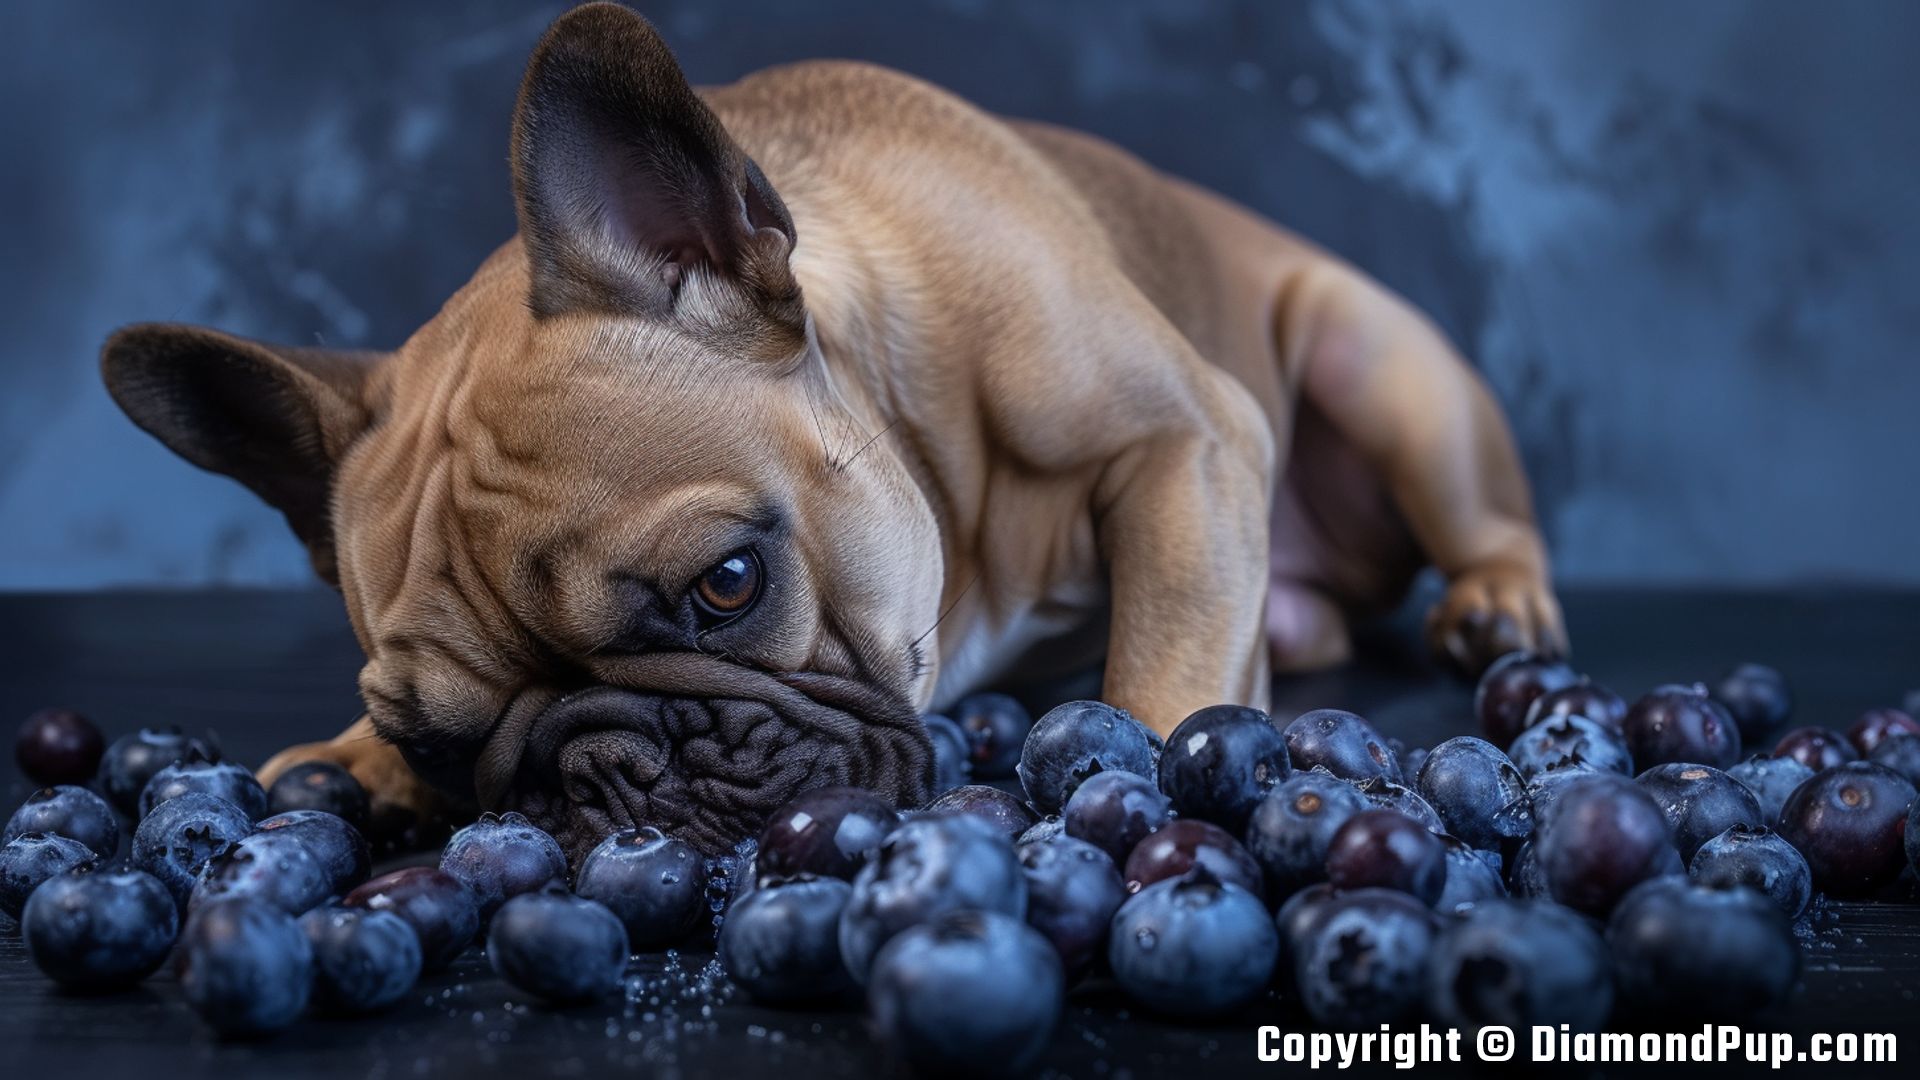 Image of a Playful French Bulldog Snacking on Blueberries